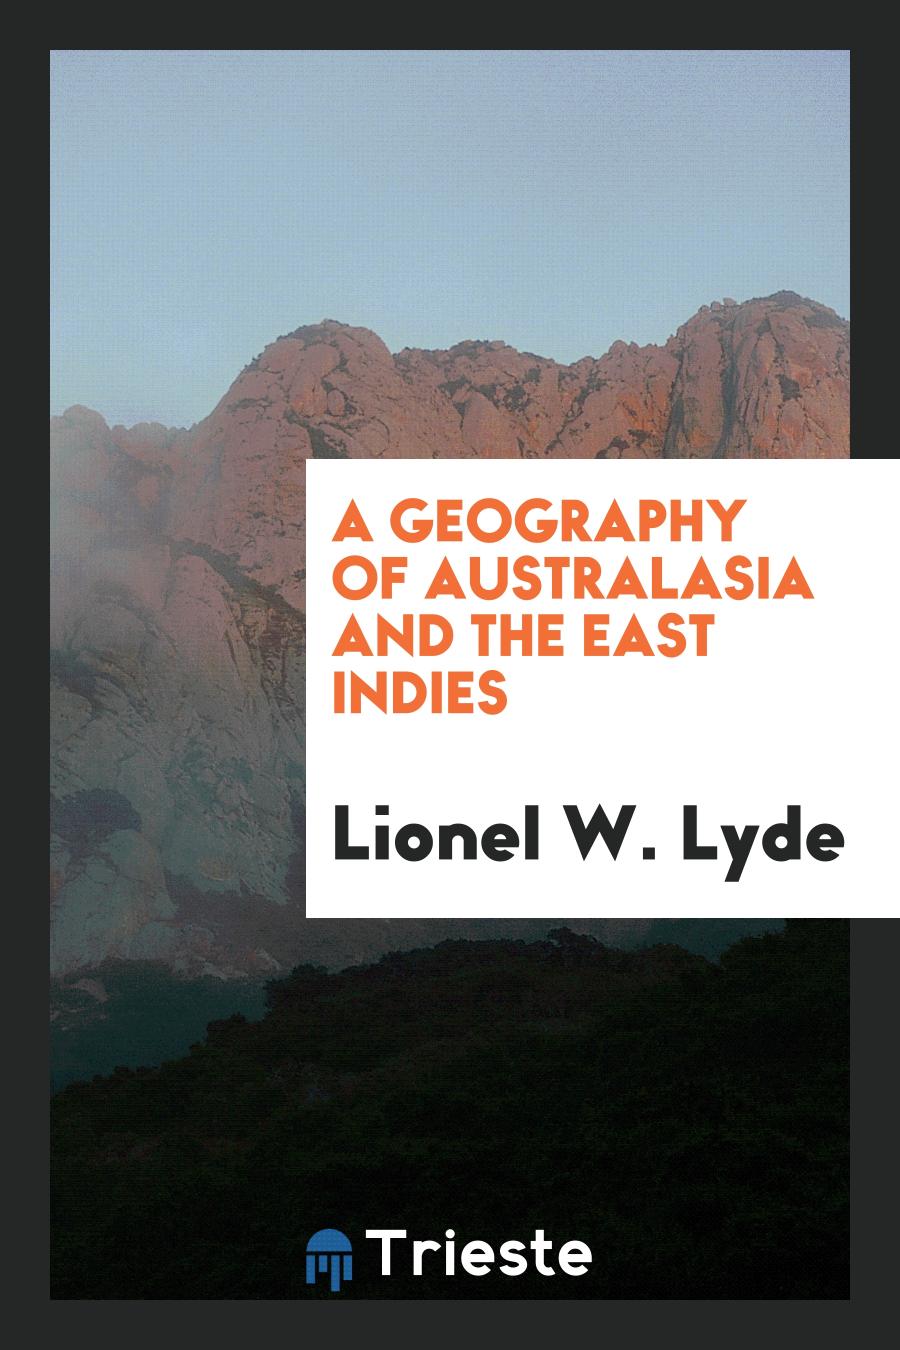 Lionel W. Lyde - A Geography of Australasia and the East Indies